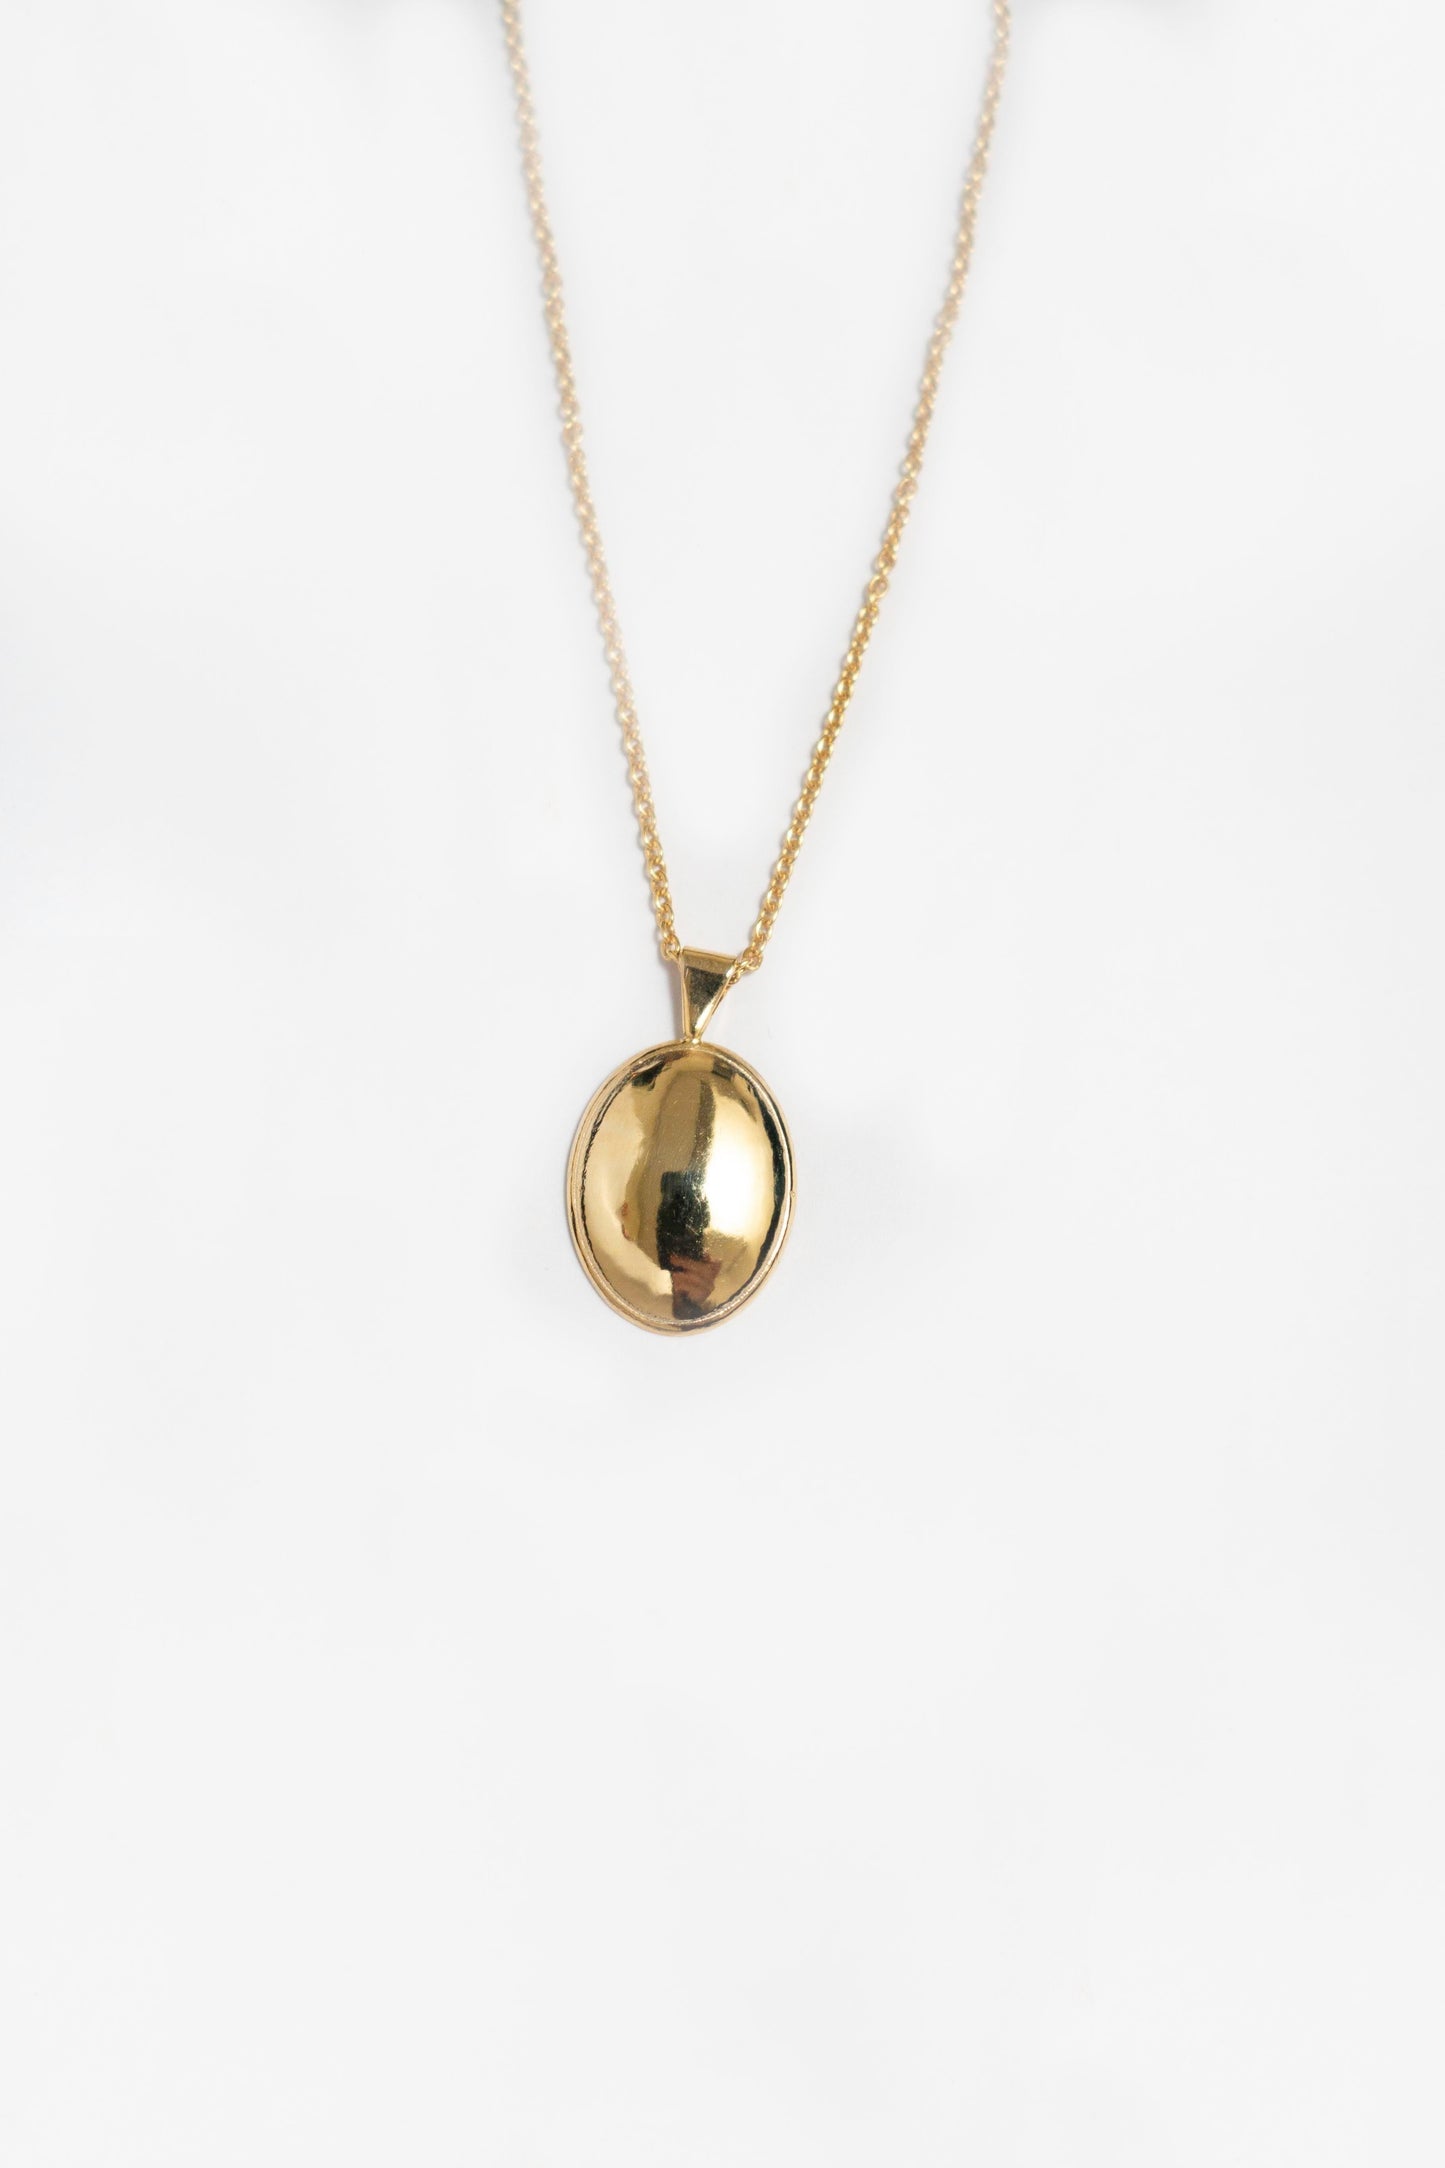 BEQUEST NECKLACE - Cong Yu - {{Jewellery}}